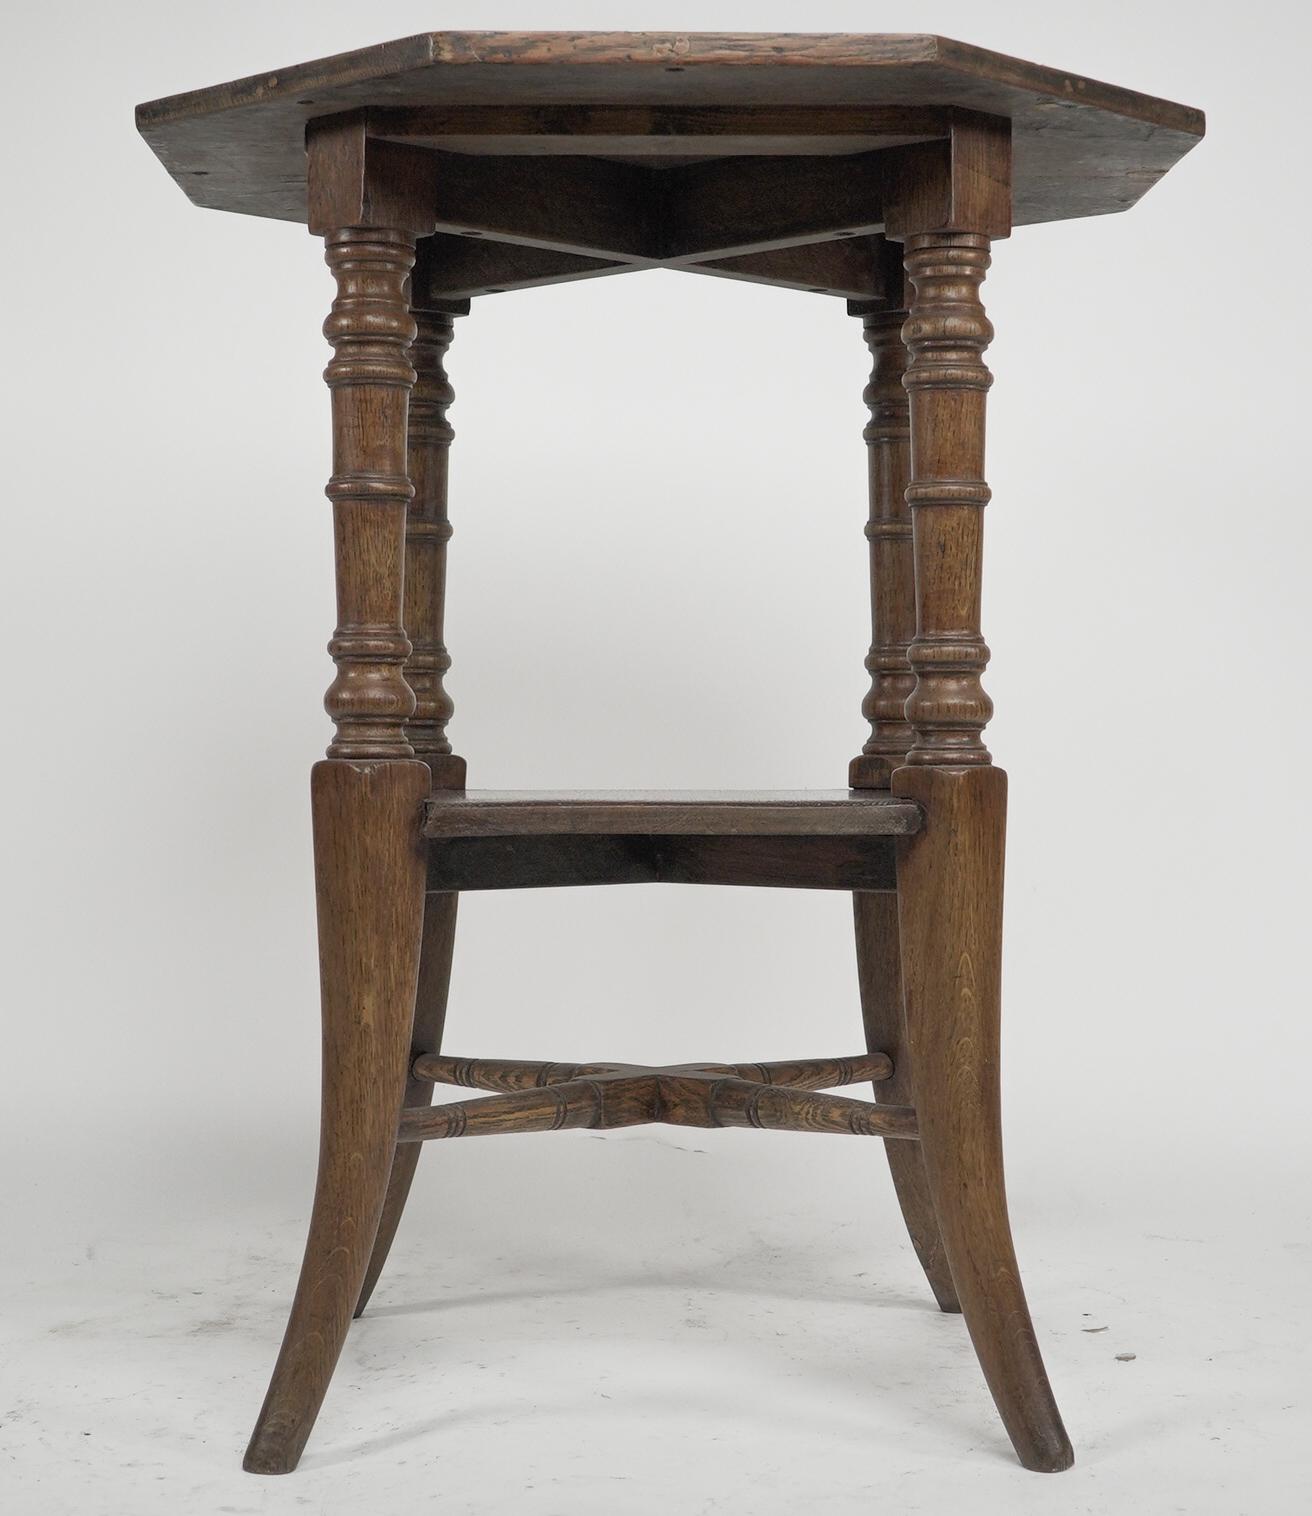 Jas Shoolbred attributed An octagonal oak side table with central shelf, carved circular details to the legs, united by lower cross stretchers.